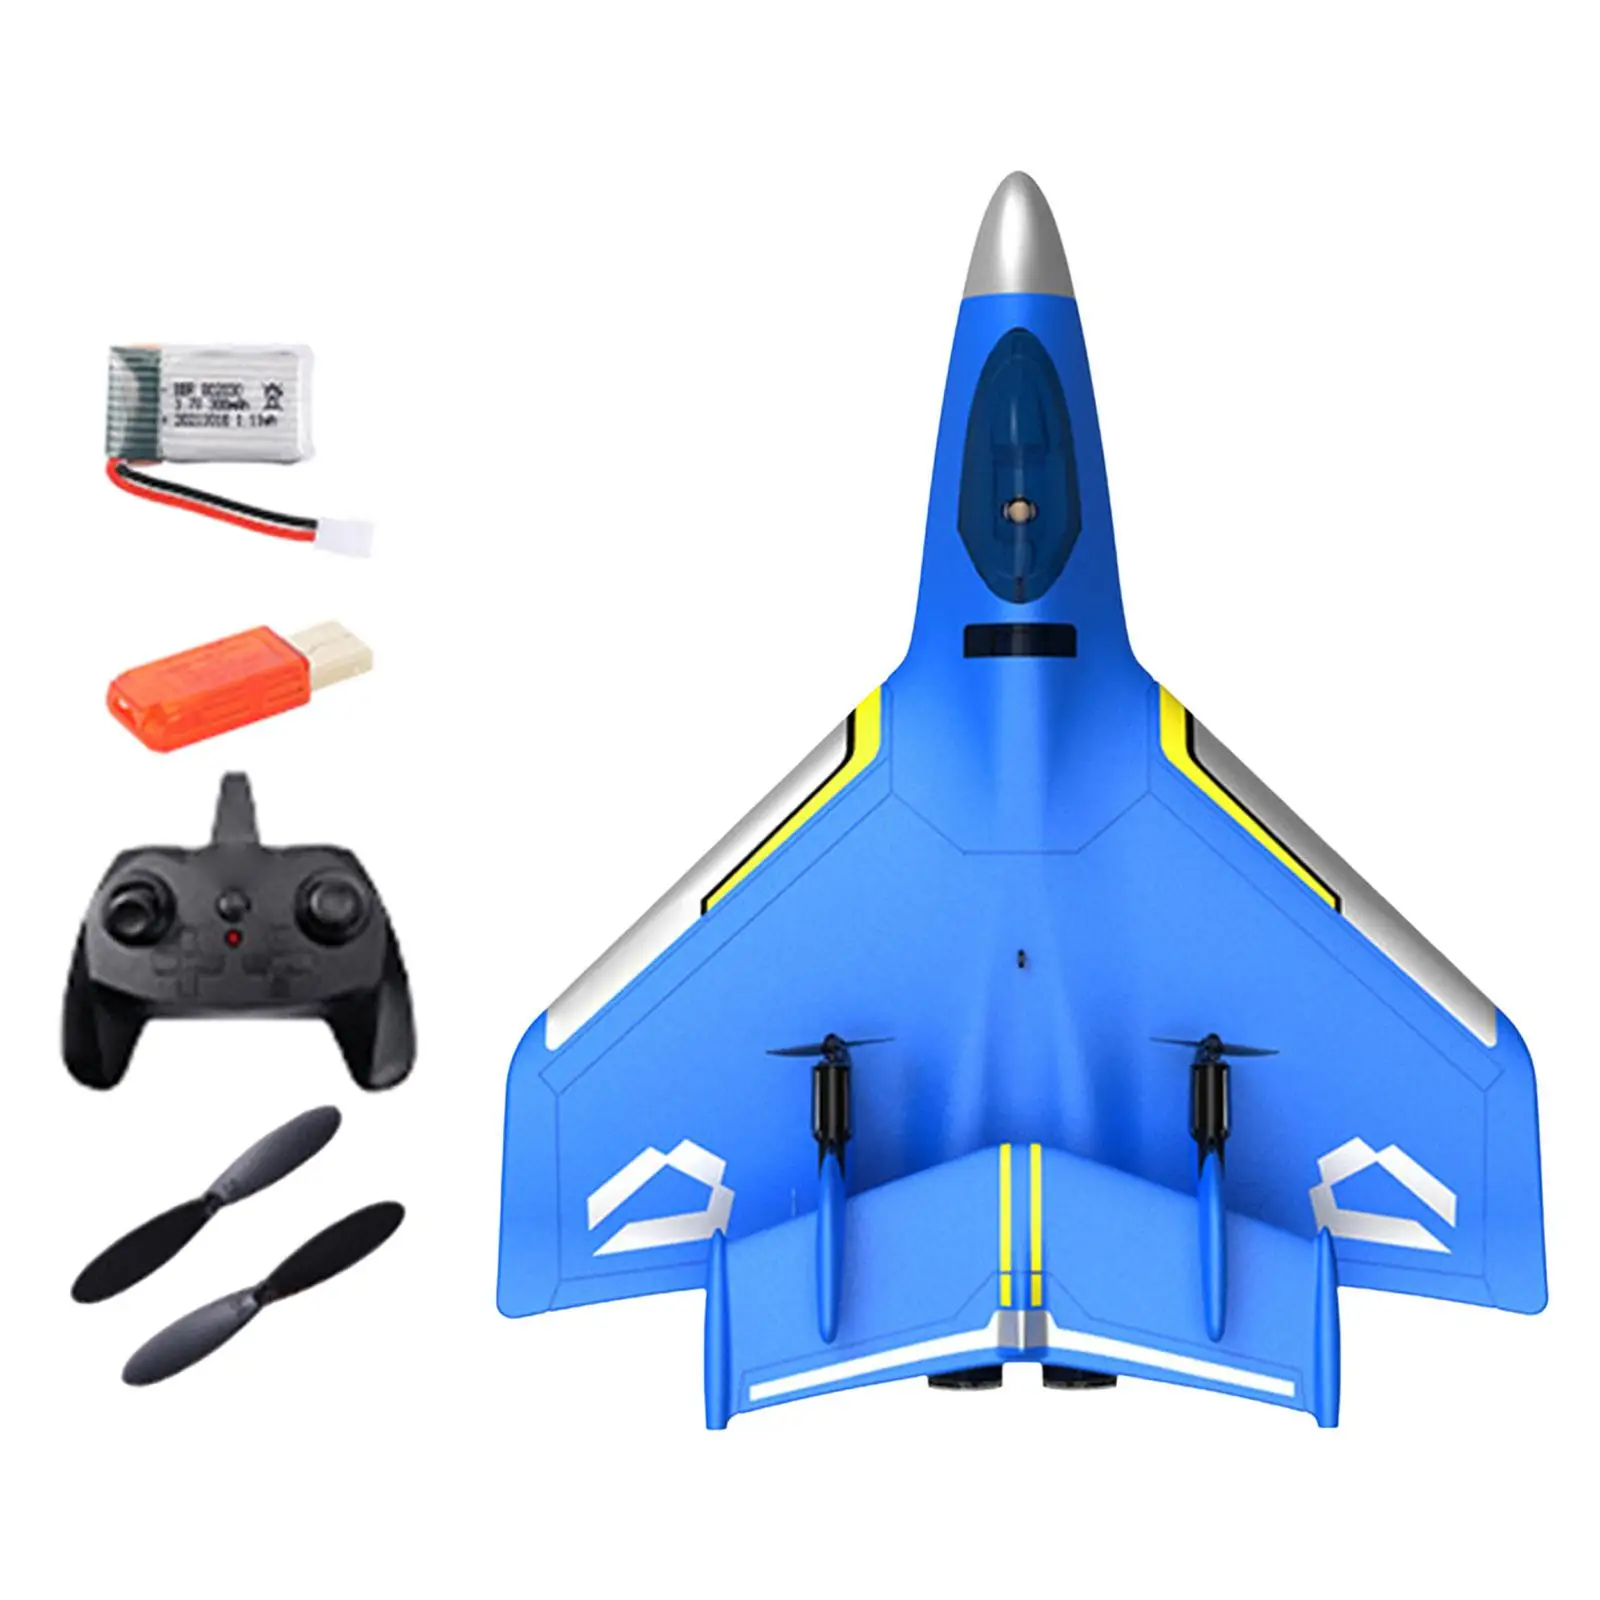 RC Airplane Lightweight 2.4GHz Anti Collision Remote Control Airplane RC Glider Aircraft for Kids Boys Girls Adults Beginner